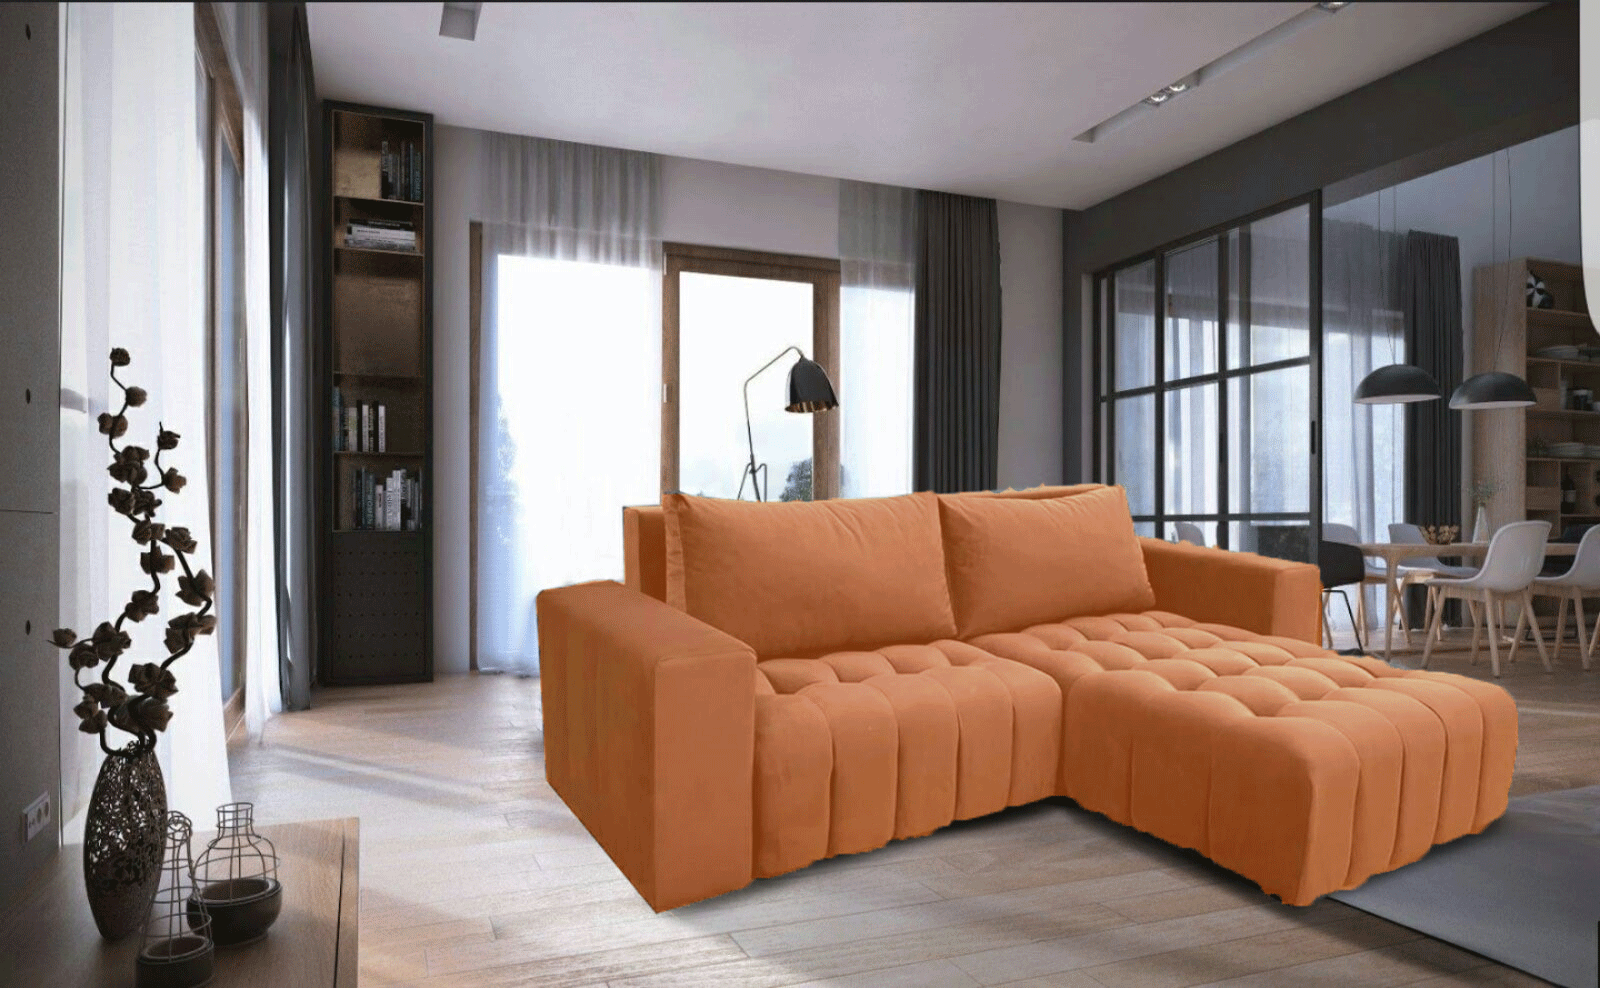 Brands SWH Classic Living Special Order Neo sofa bed w/ storage Orange